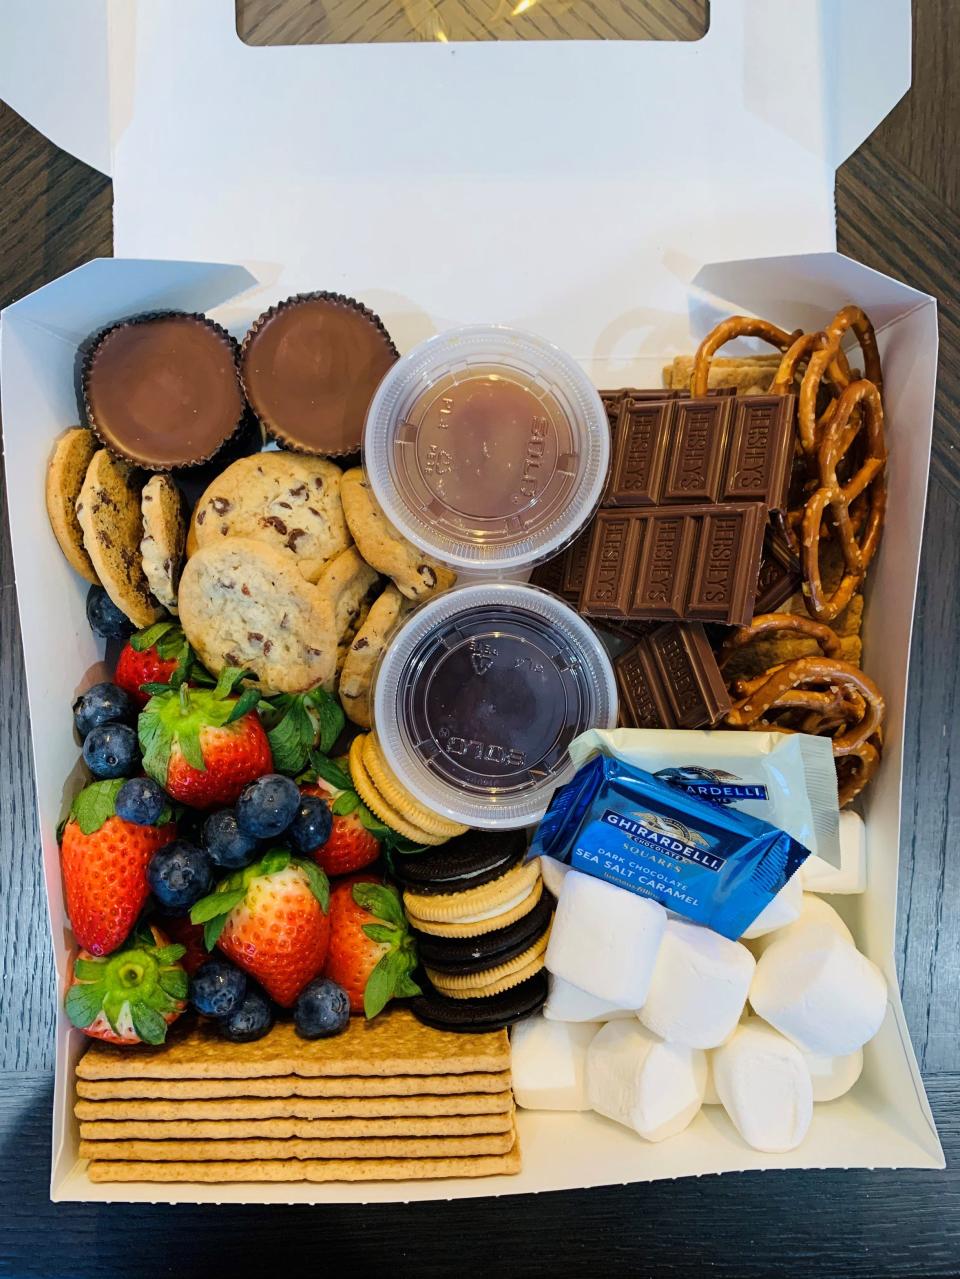 A s'mores charcuterie board from All Aboard, a Mamaroneck-based business started by a teacher in January 2021.